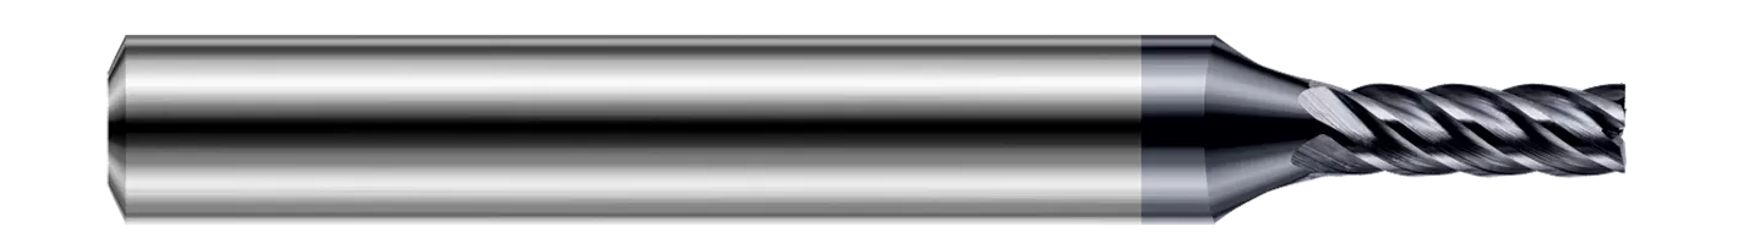 End Mills for Hardened Steels - Square - For Steels Up to 55 Rc